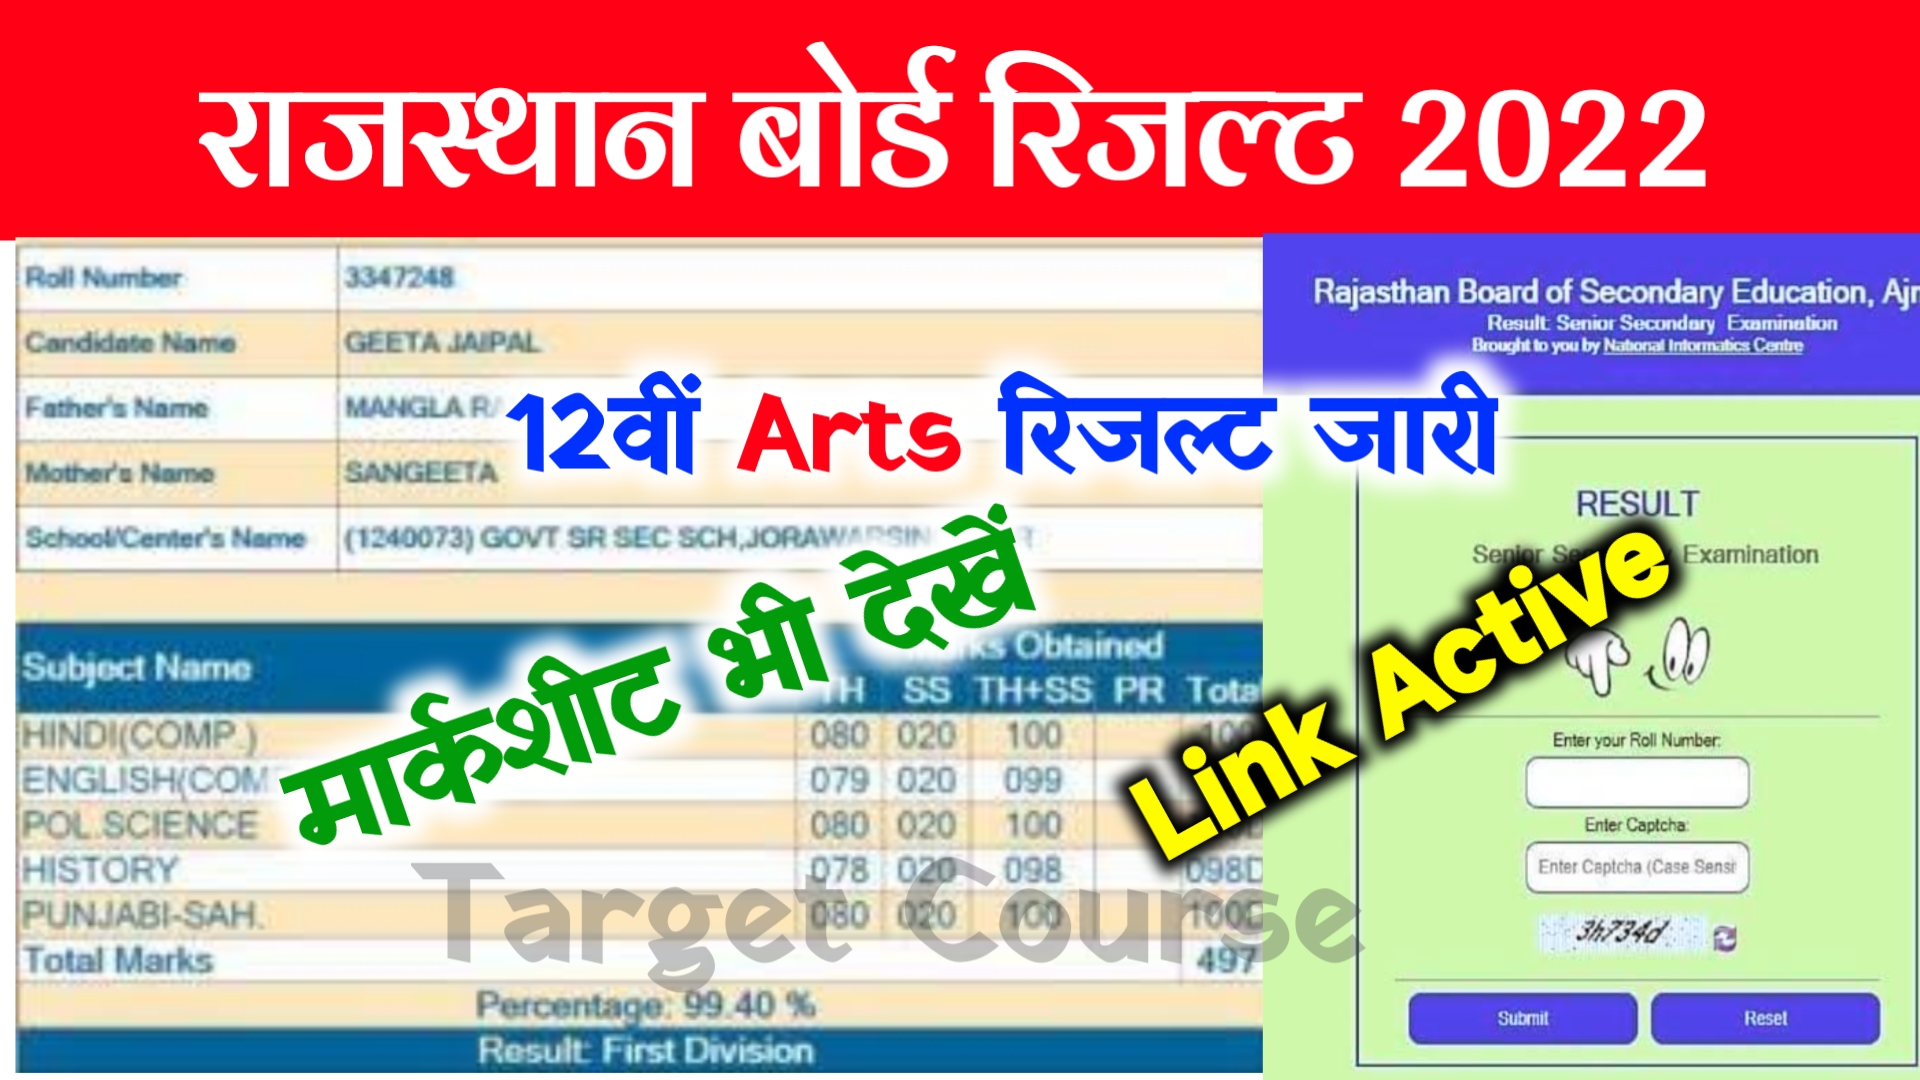 Rbse 12th Arts Result 2022 Out Now ~ Live Check @rajresults.nic.in